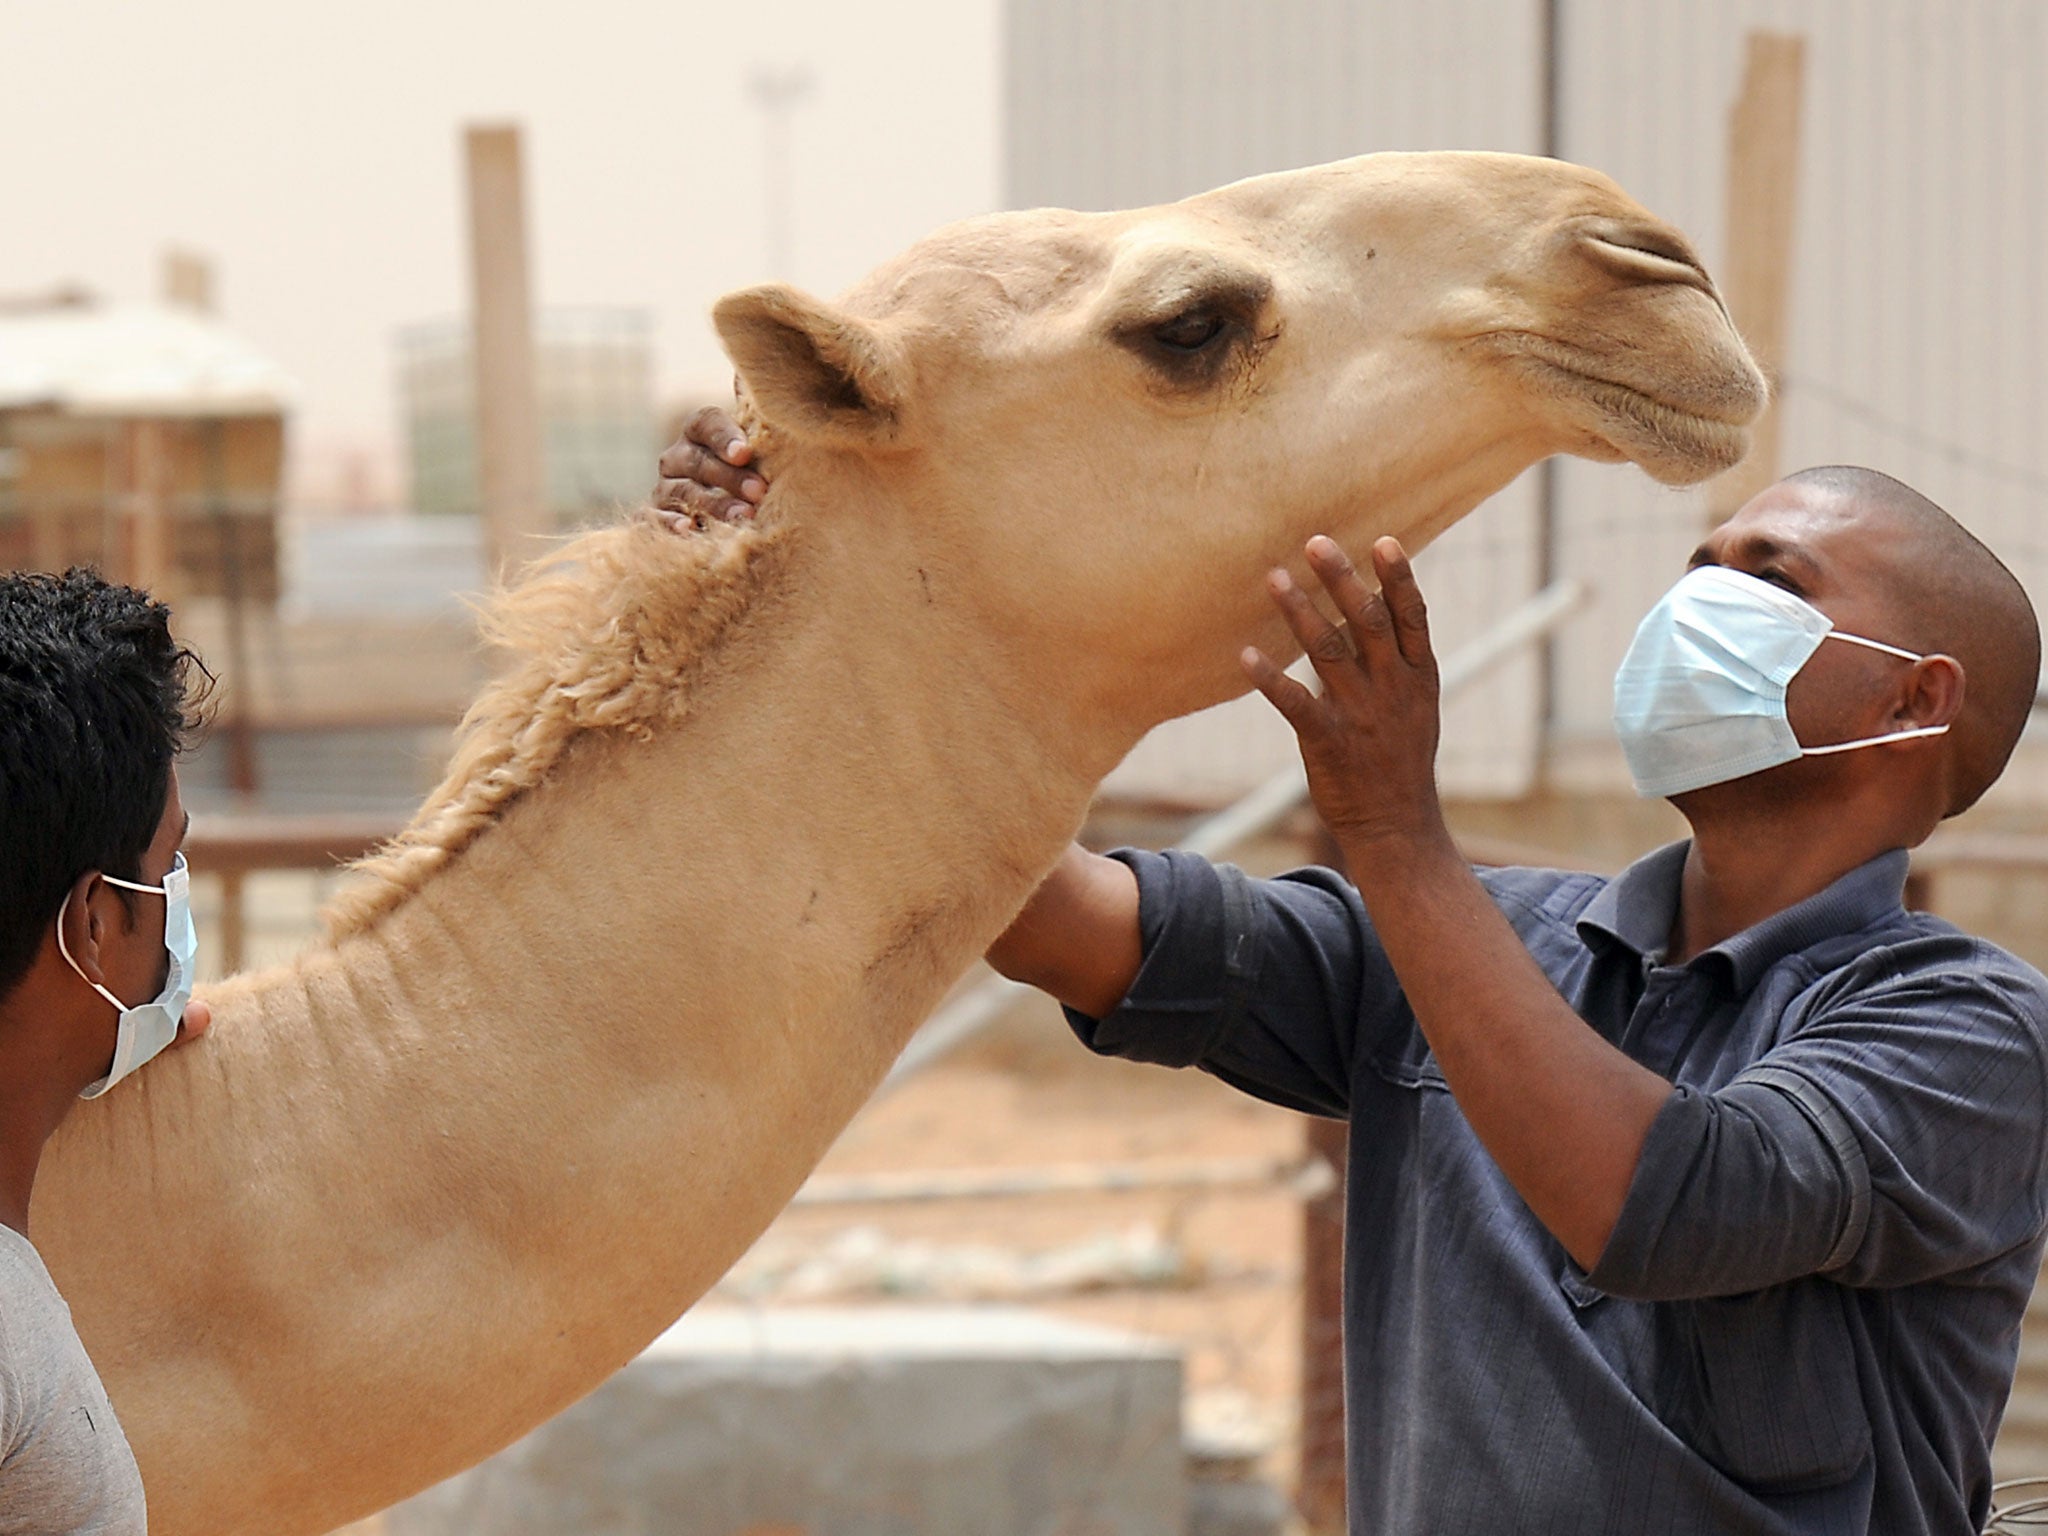 An Indian worker wears a mouth and nose mask as he touches a camel at his Saudi employer's farm on May 12, 2014 outside Riyadh.